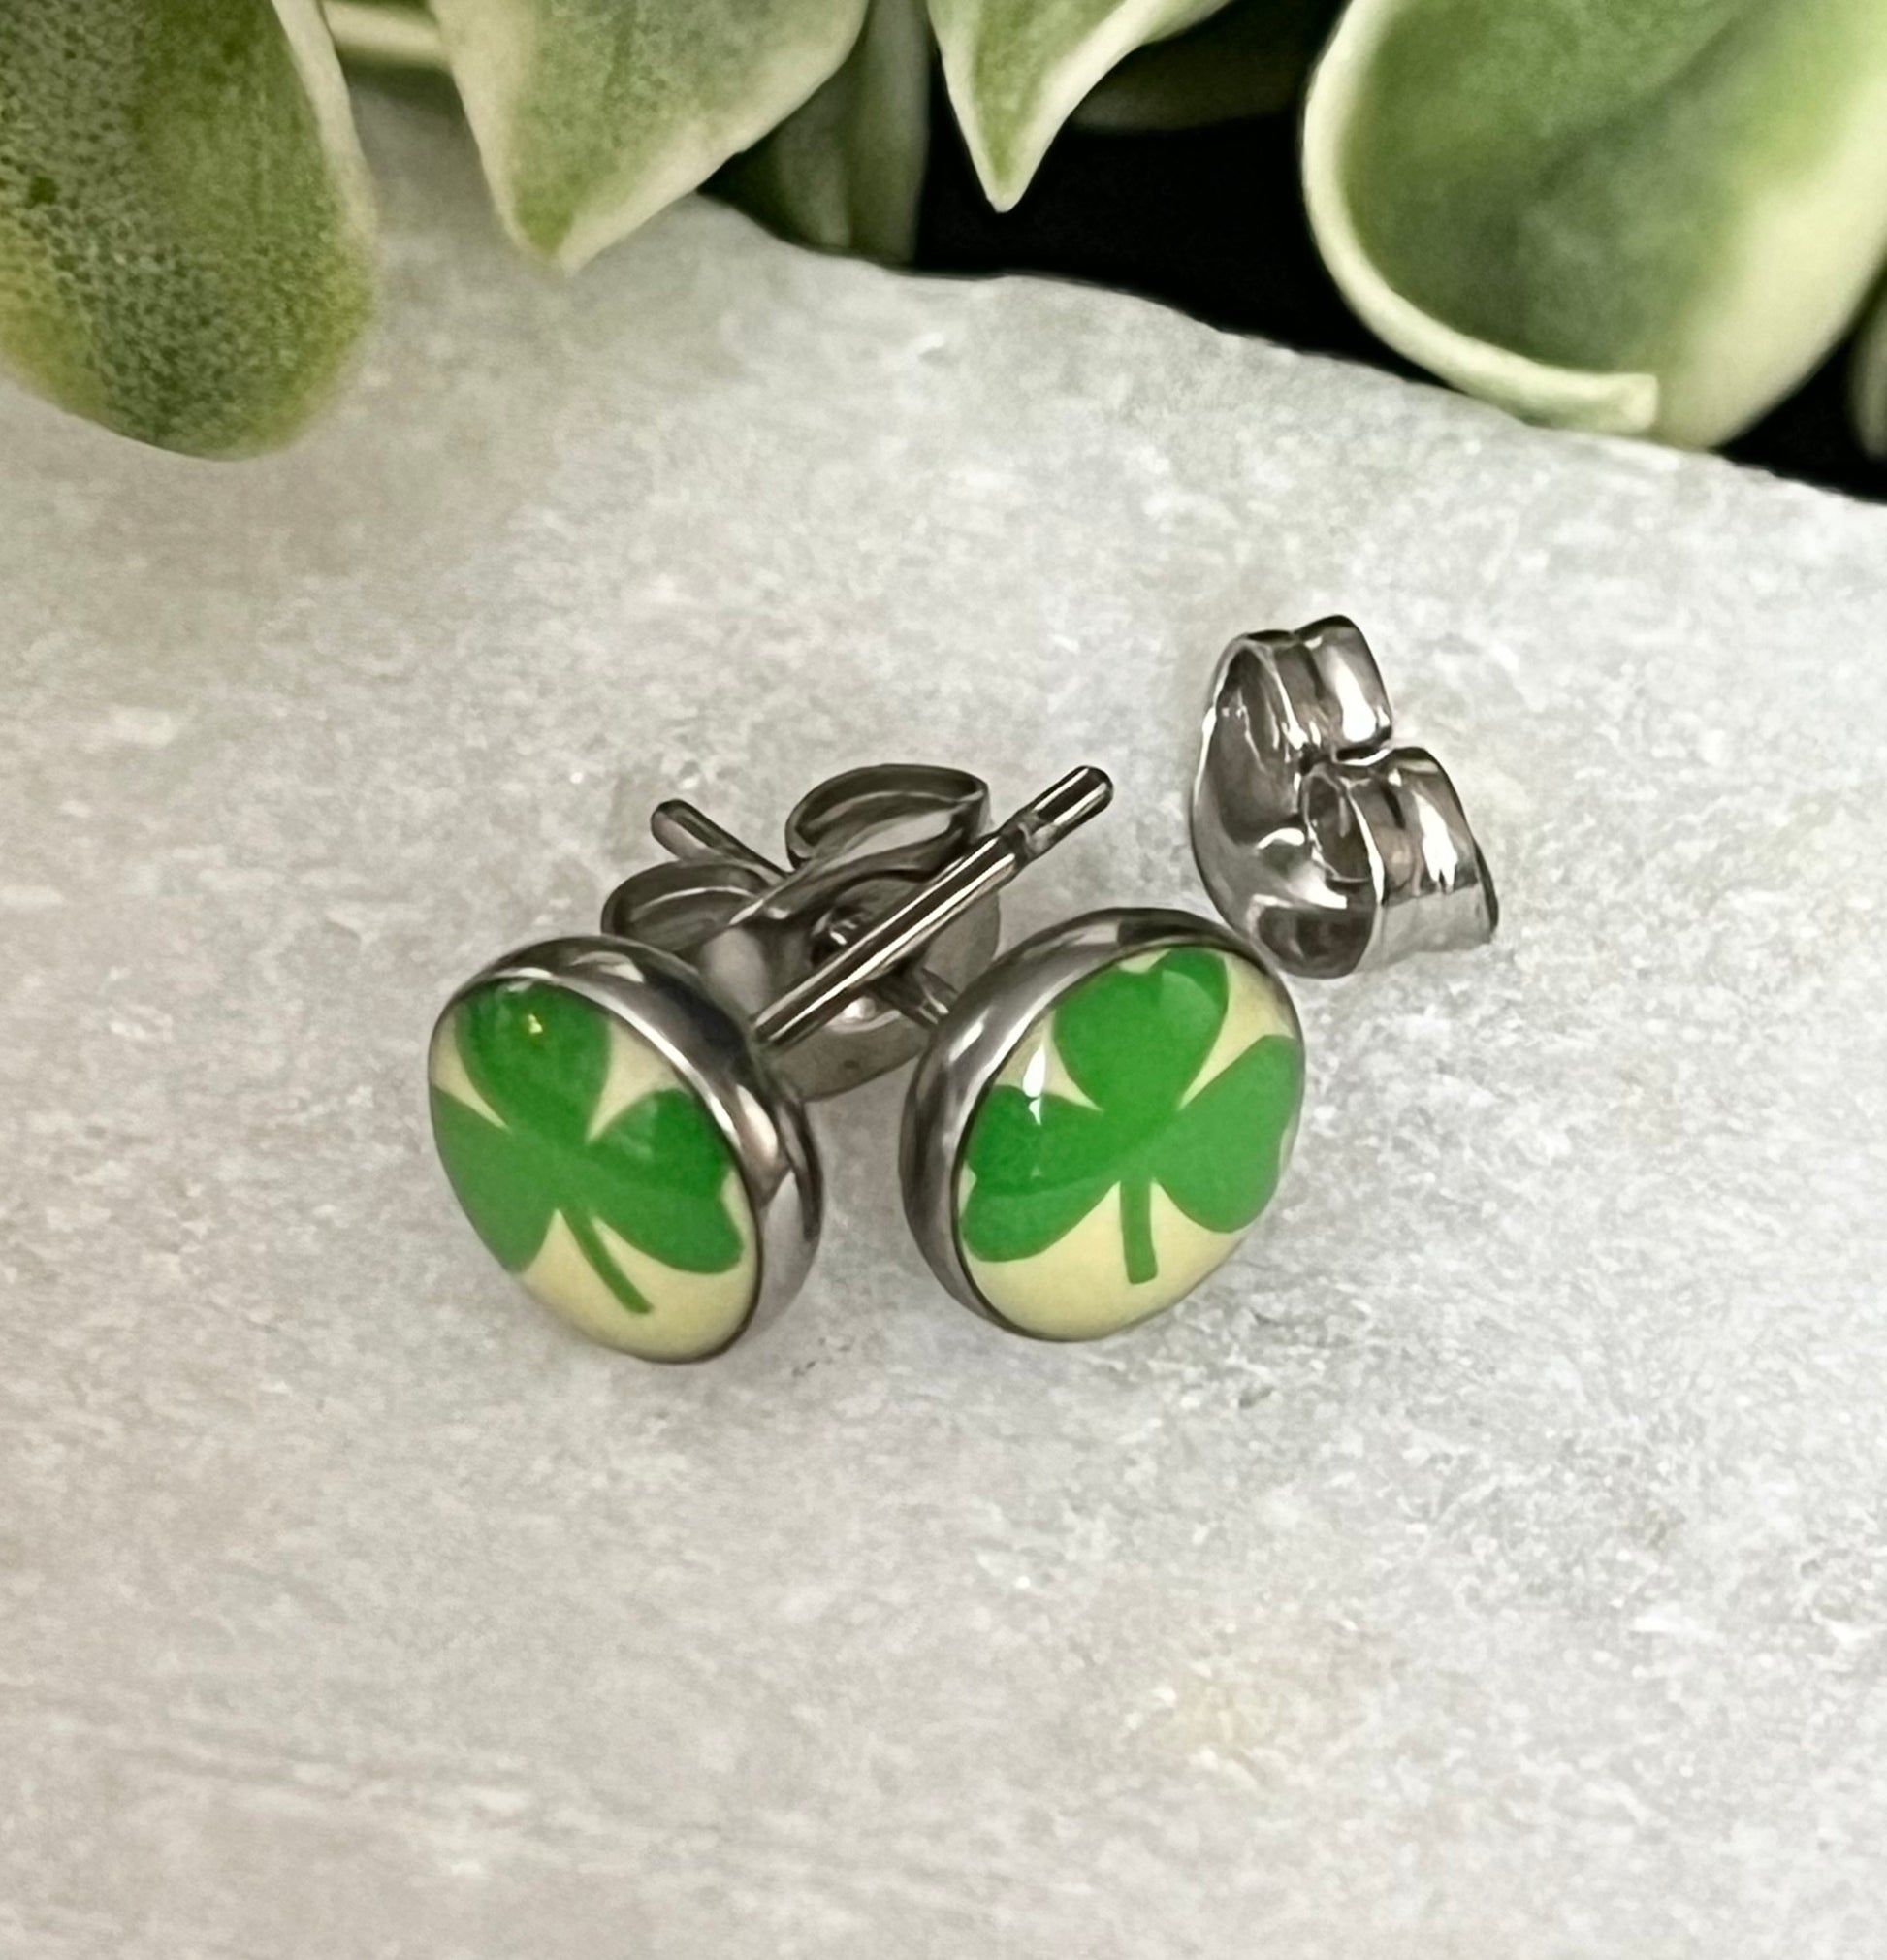 PAIR of Unique Green Shamrock/ Clover 316L Surigical Steel Earrings with Butterfly Back - Saint Patricks - St Patty's Day - 20g Available!